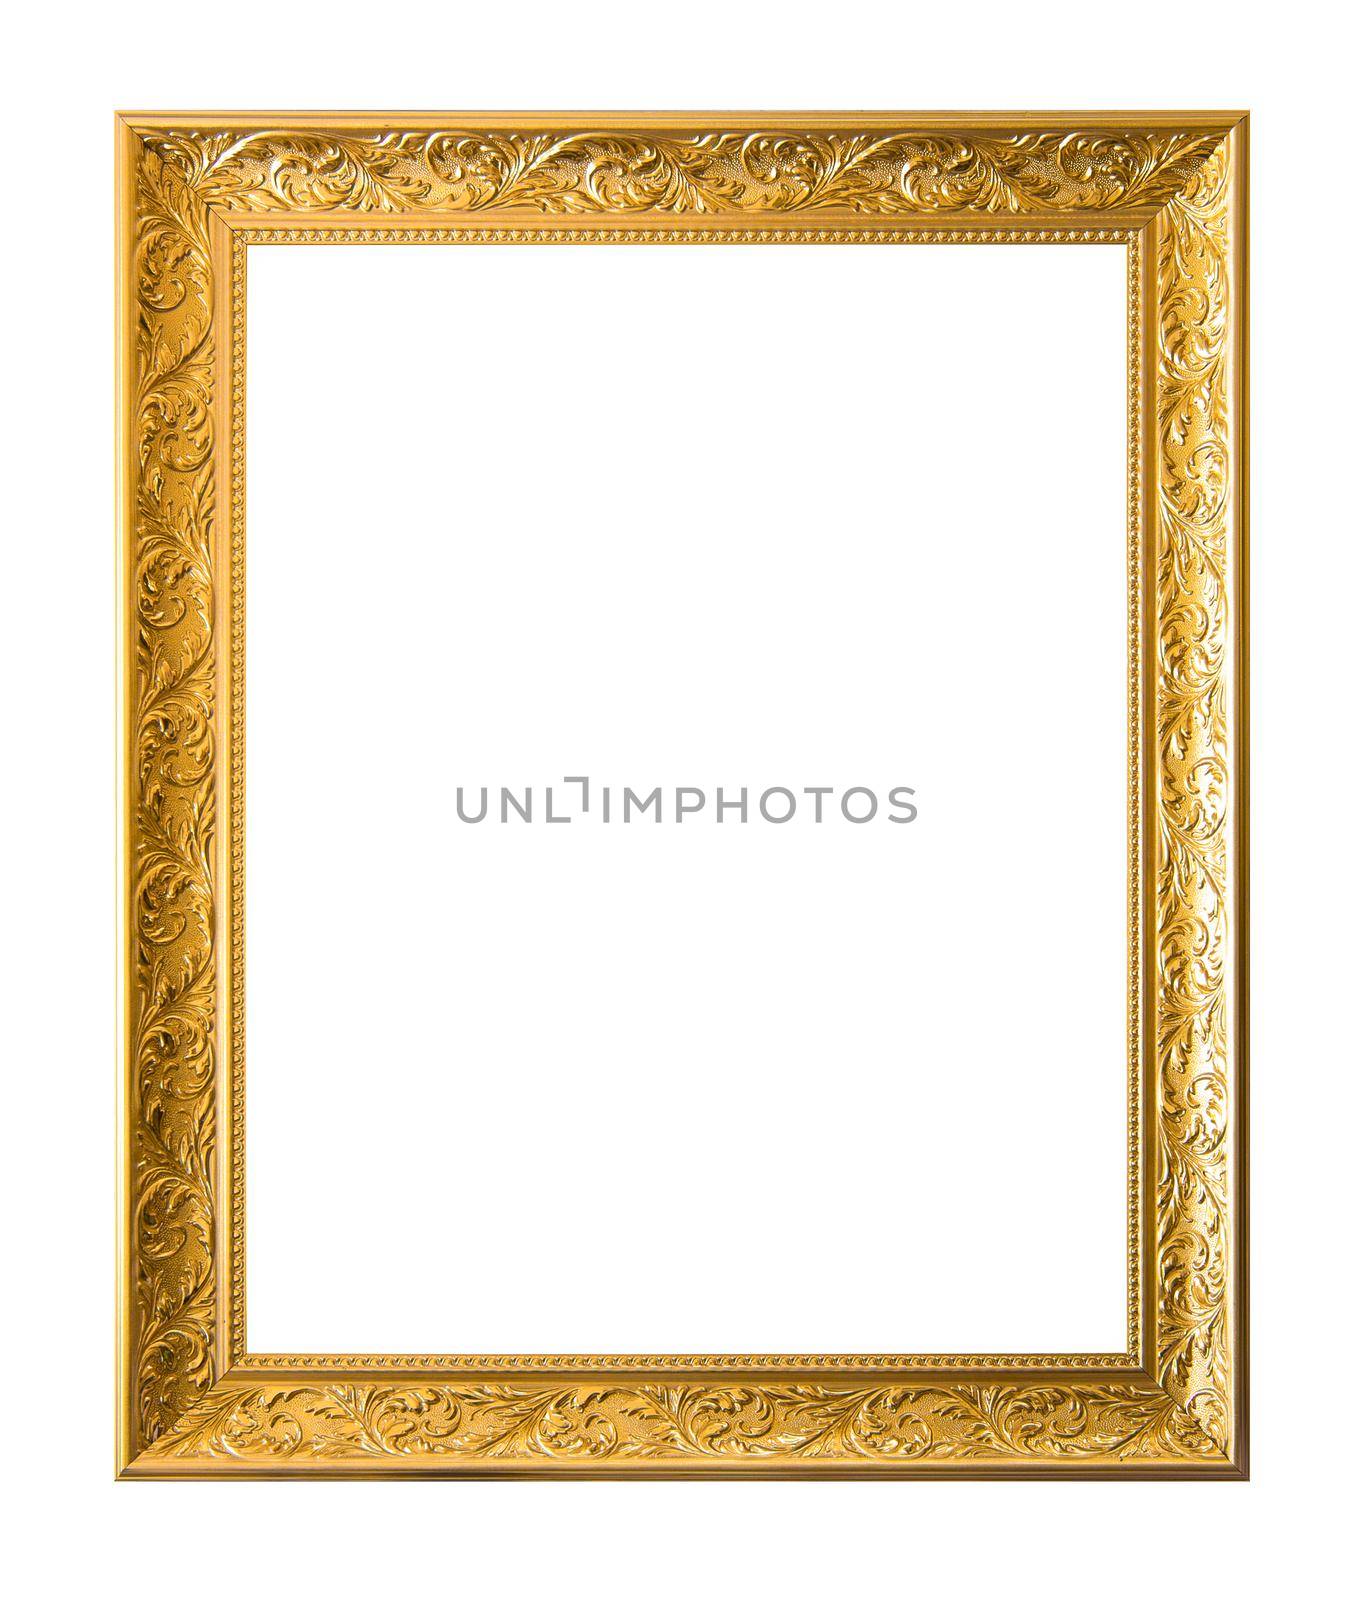 Gold ancient vintage wooden frame isolated on white background